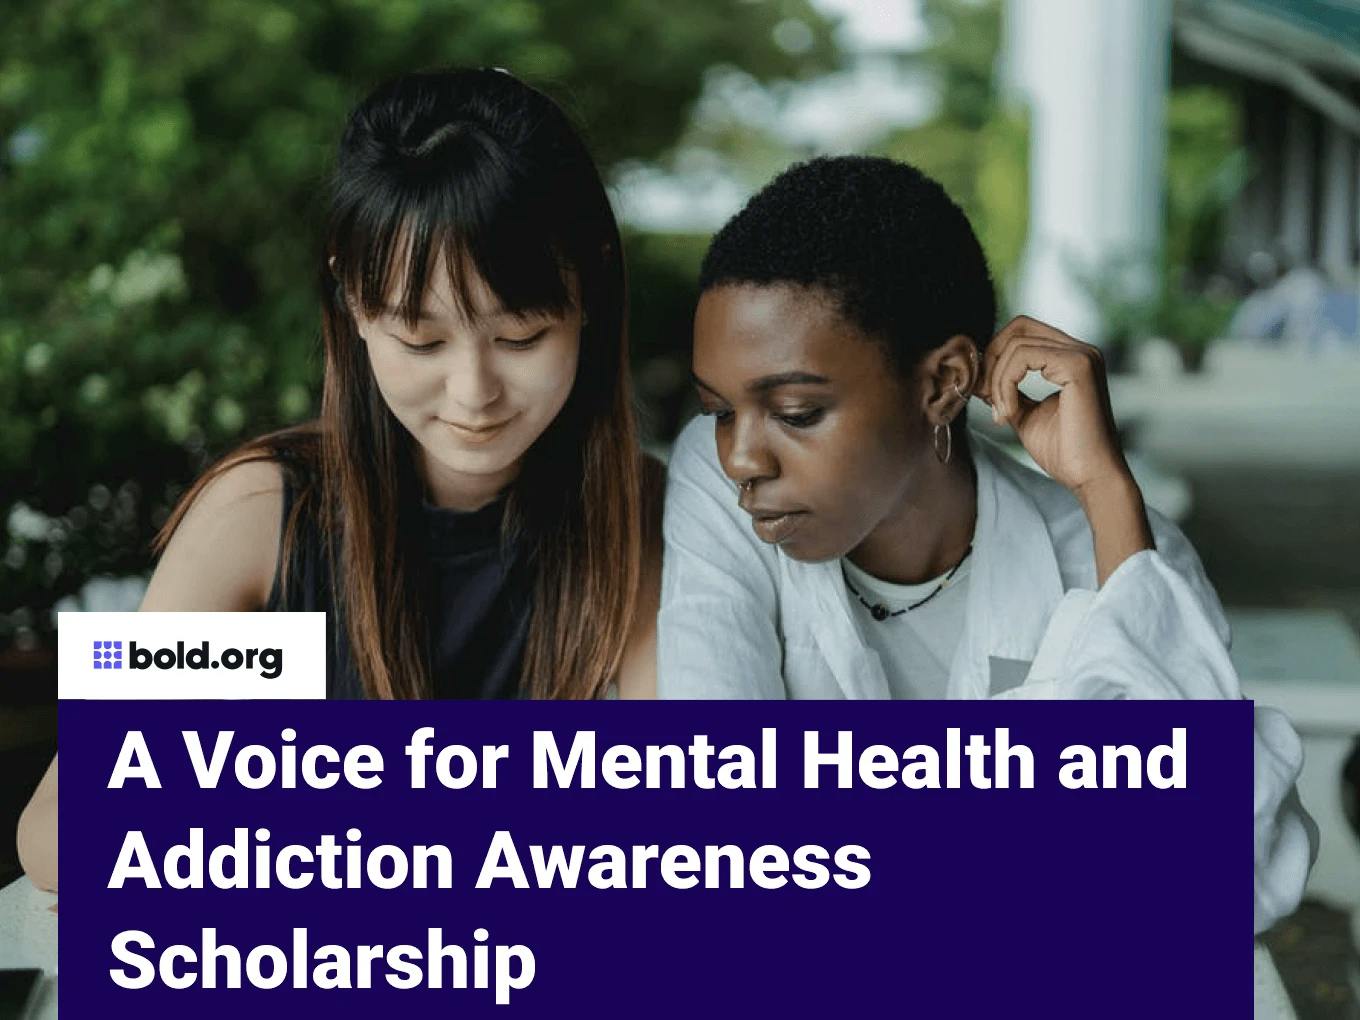 A Voice for Mental Health and Addiction Awareness Scholarship